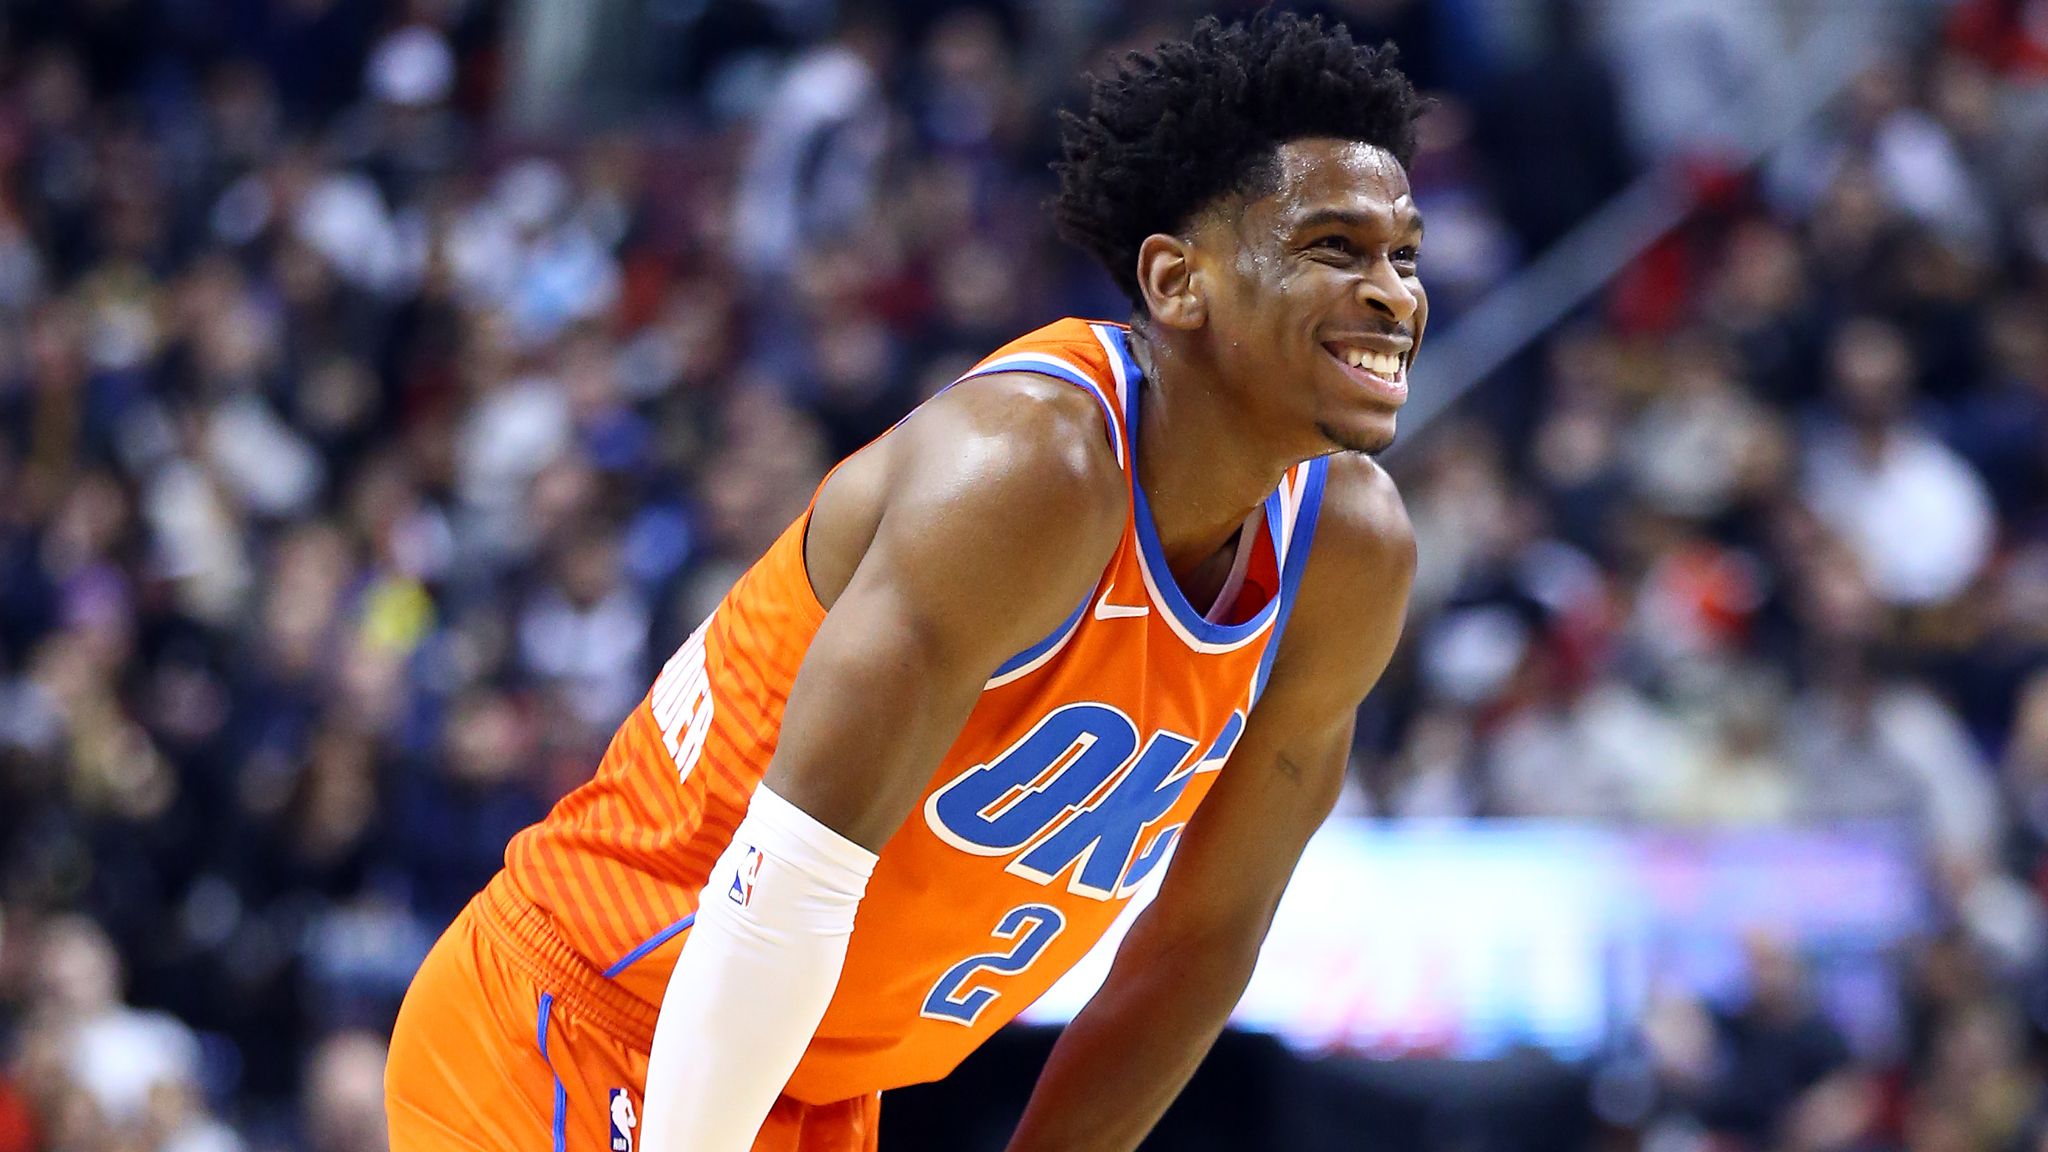 CBS Predicts Shai Gilgeous-Alexander Could Become NBA's First $400